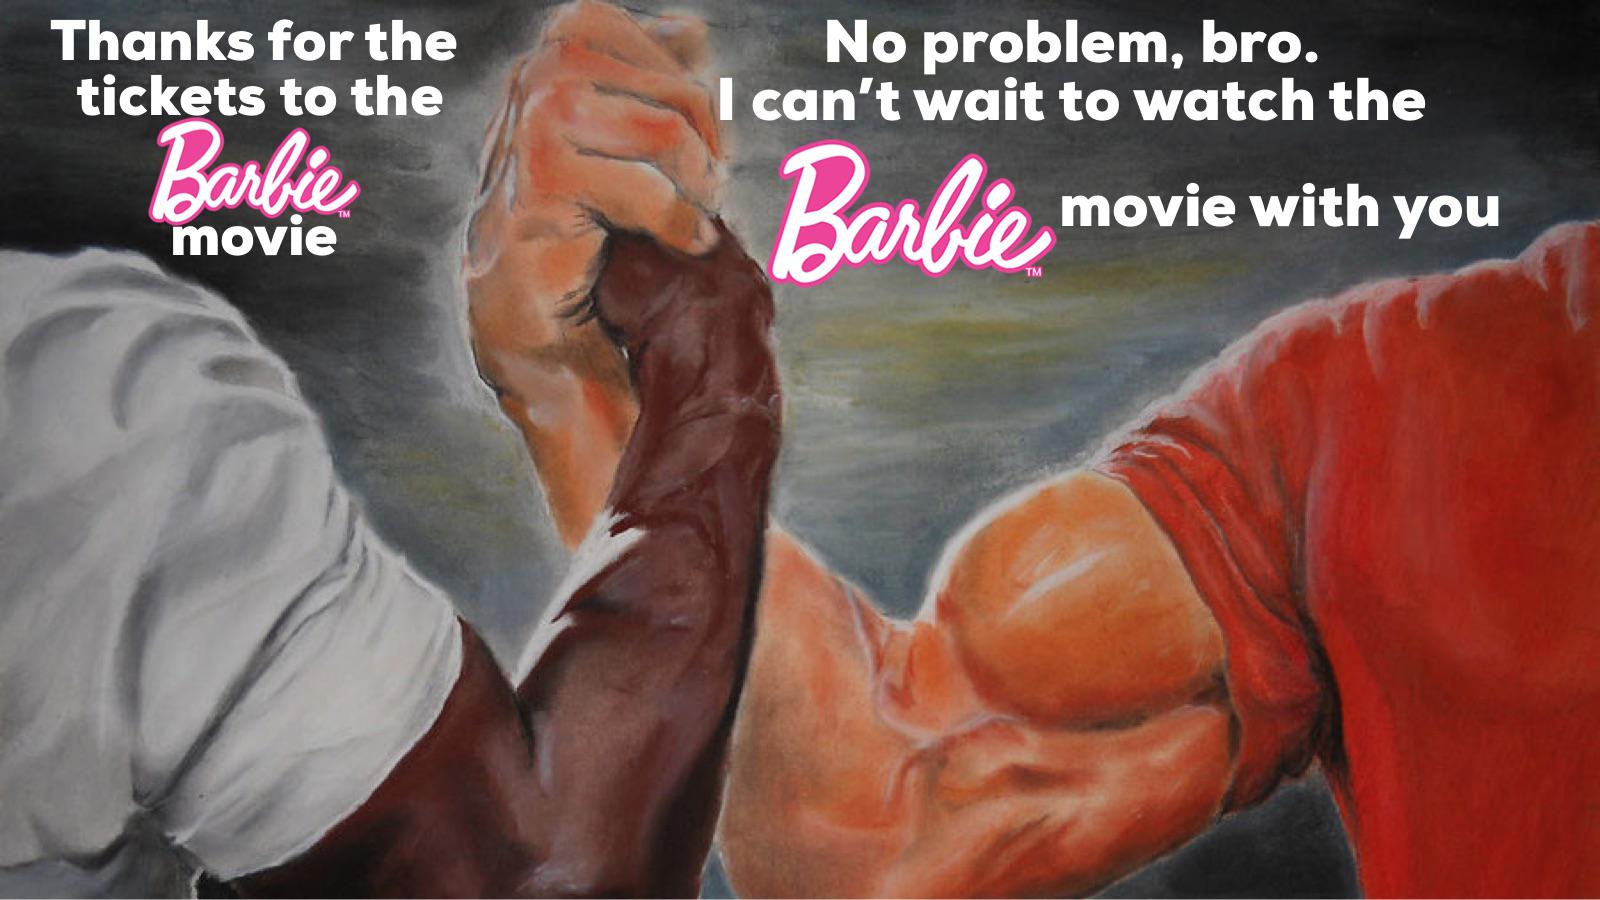 dank memes - funny memes -solidarity handshake meme - Thanks for the tickets to the Barbie movie No problem, bro. I can't wait to watch the Barbie movie with you